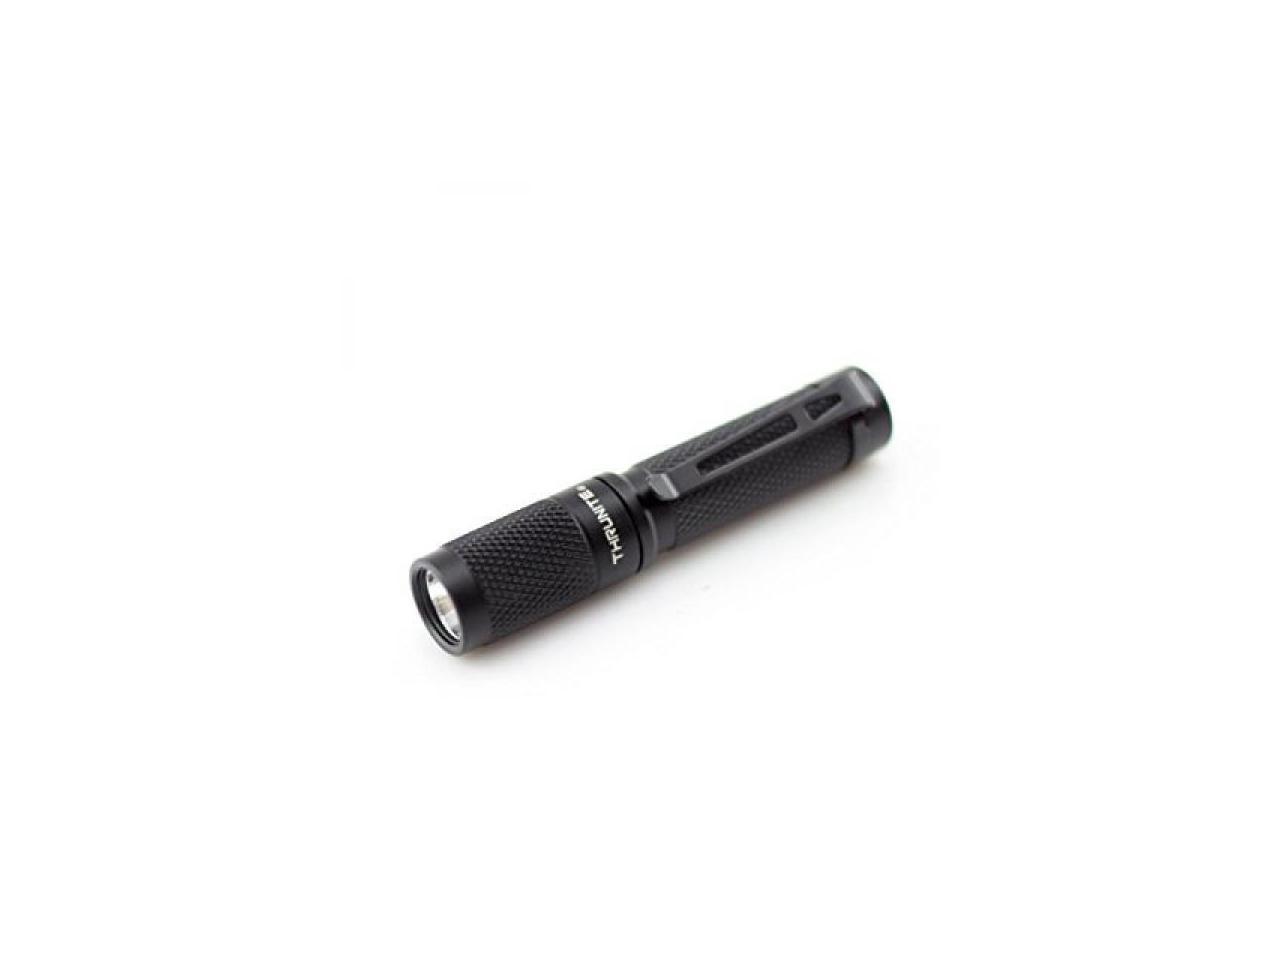 Battery Not Included Max ThruNite Ti3 V2 Mini EDC Cree XP-G2 R5 LED Torch AAA 